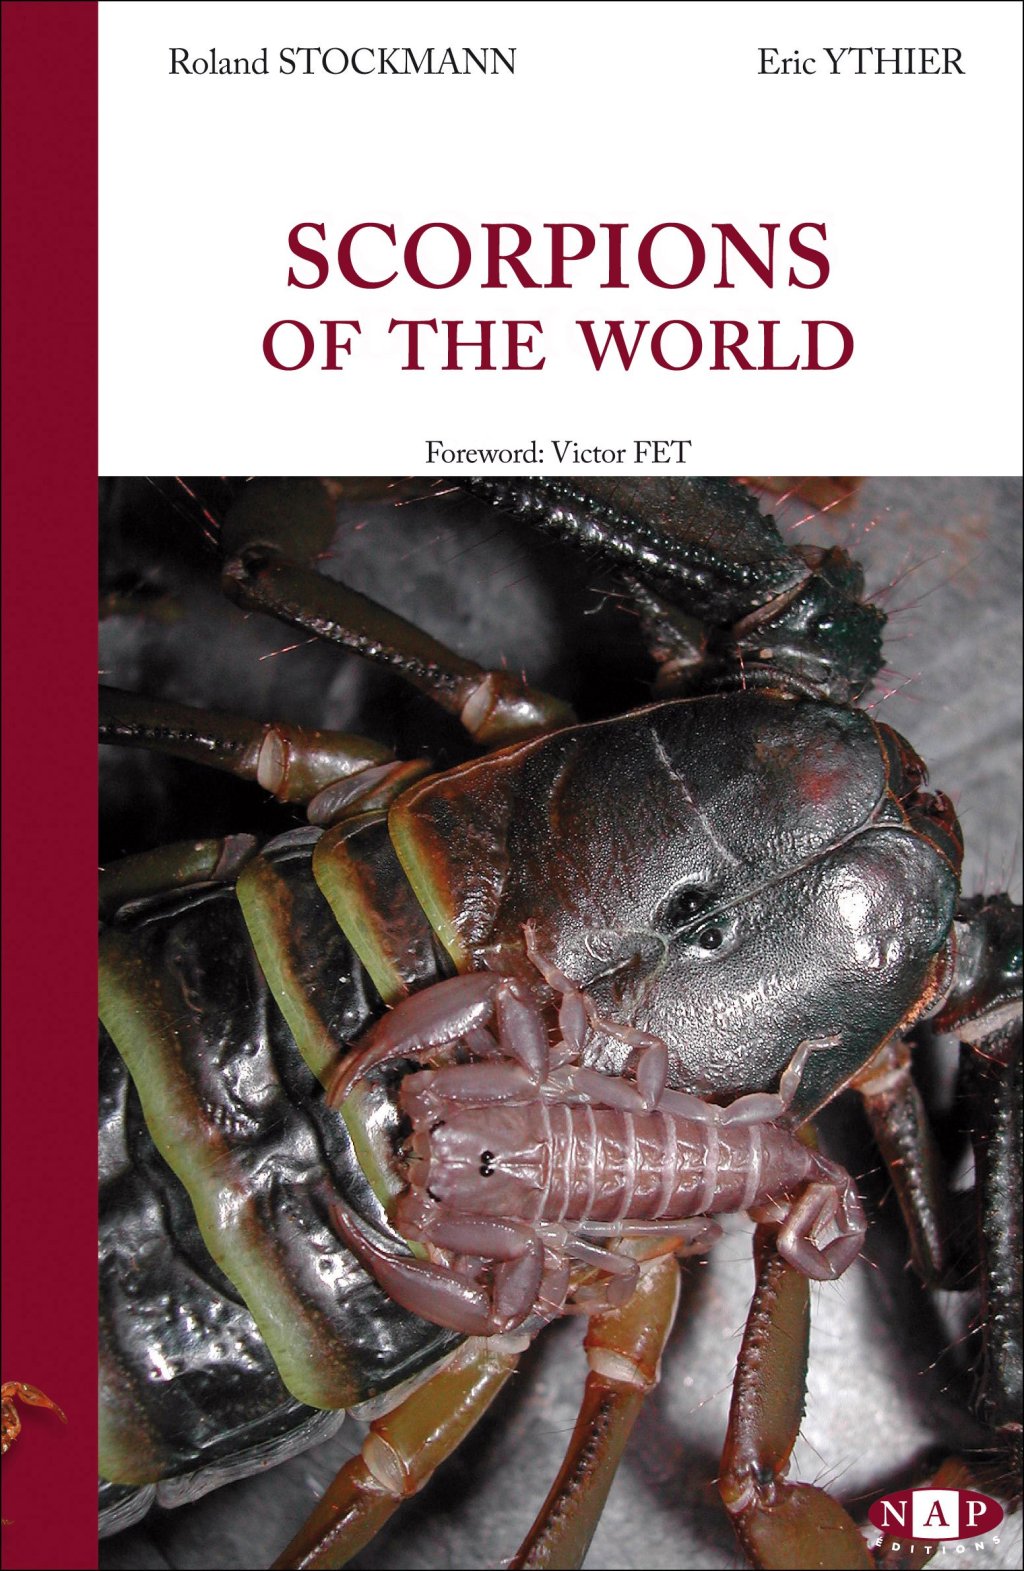 BOOK REVIEW: Scorpions Of The World by Roland Stockmann and Eric Ythier